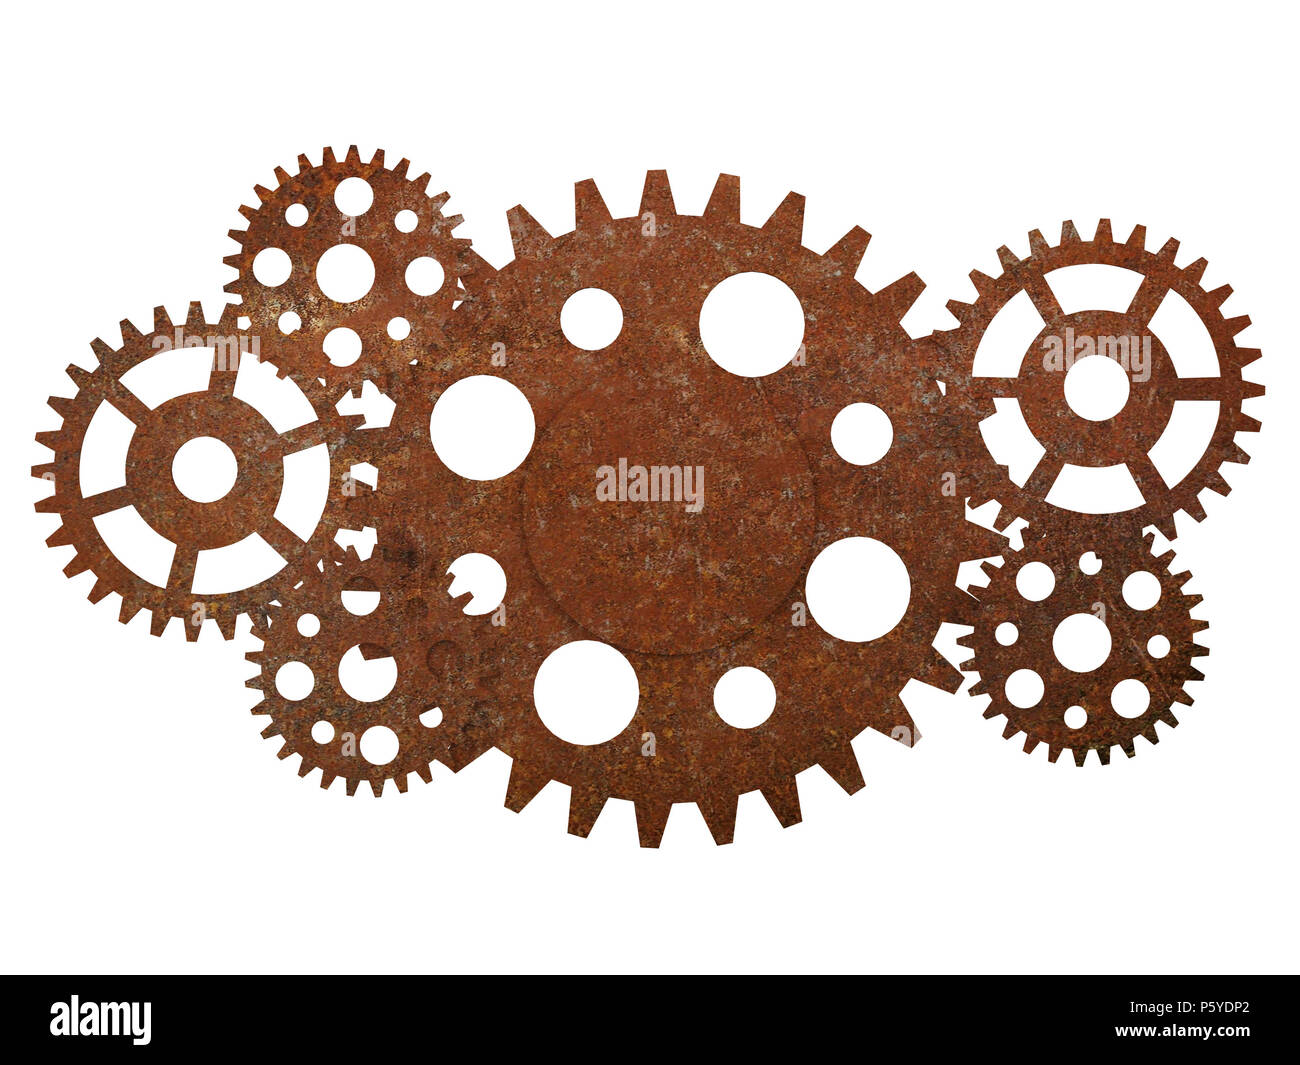 Rusty gears and cogwheels isolated on white background Stock Photo